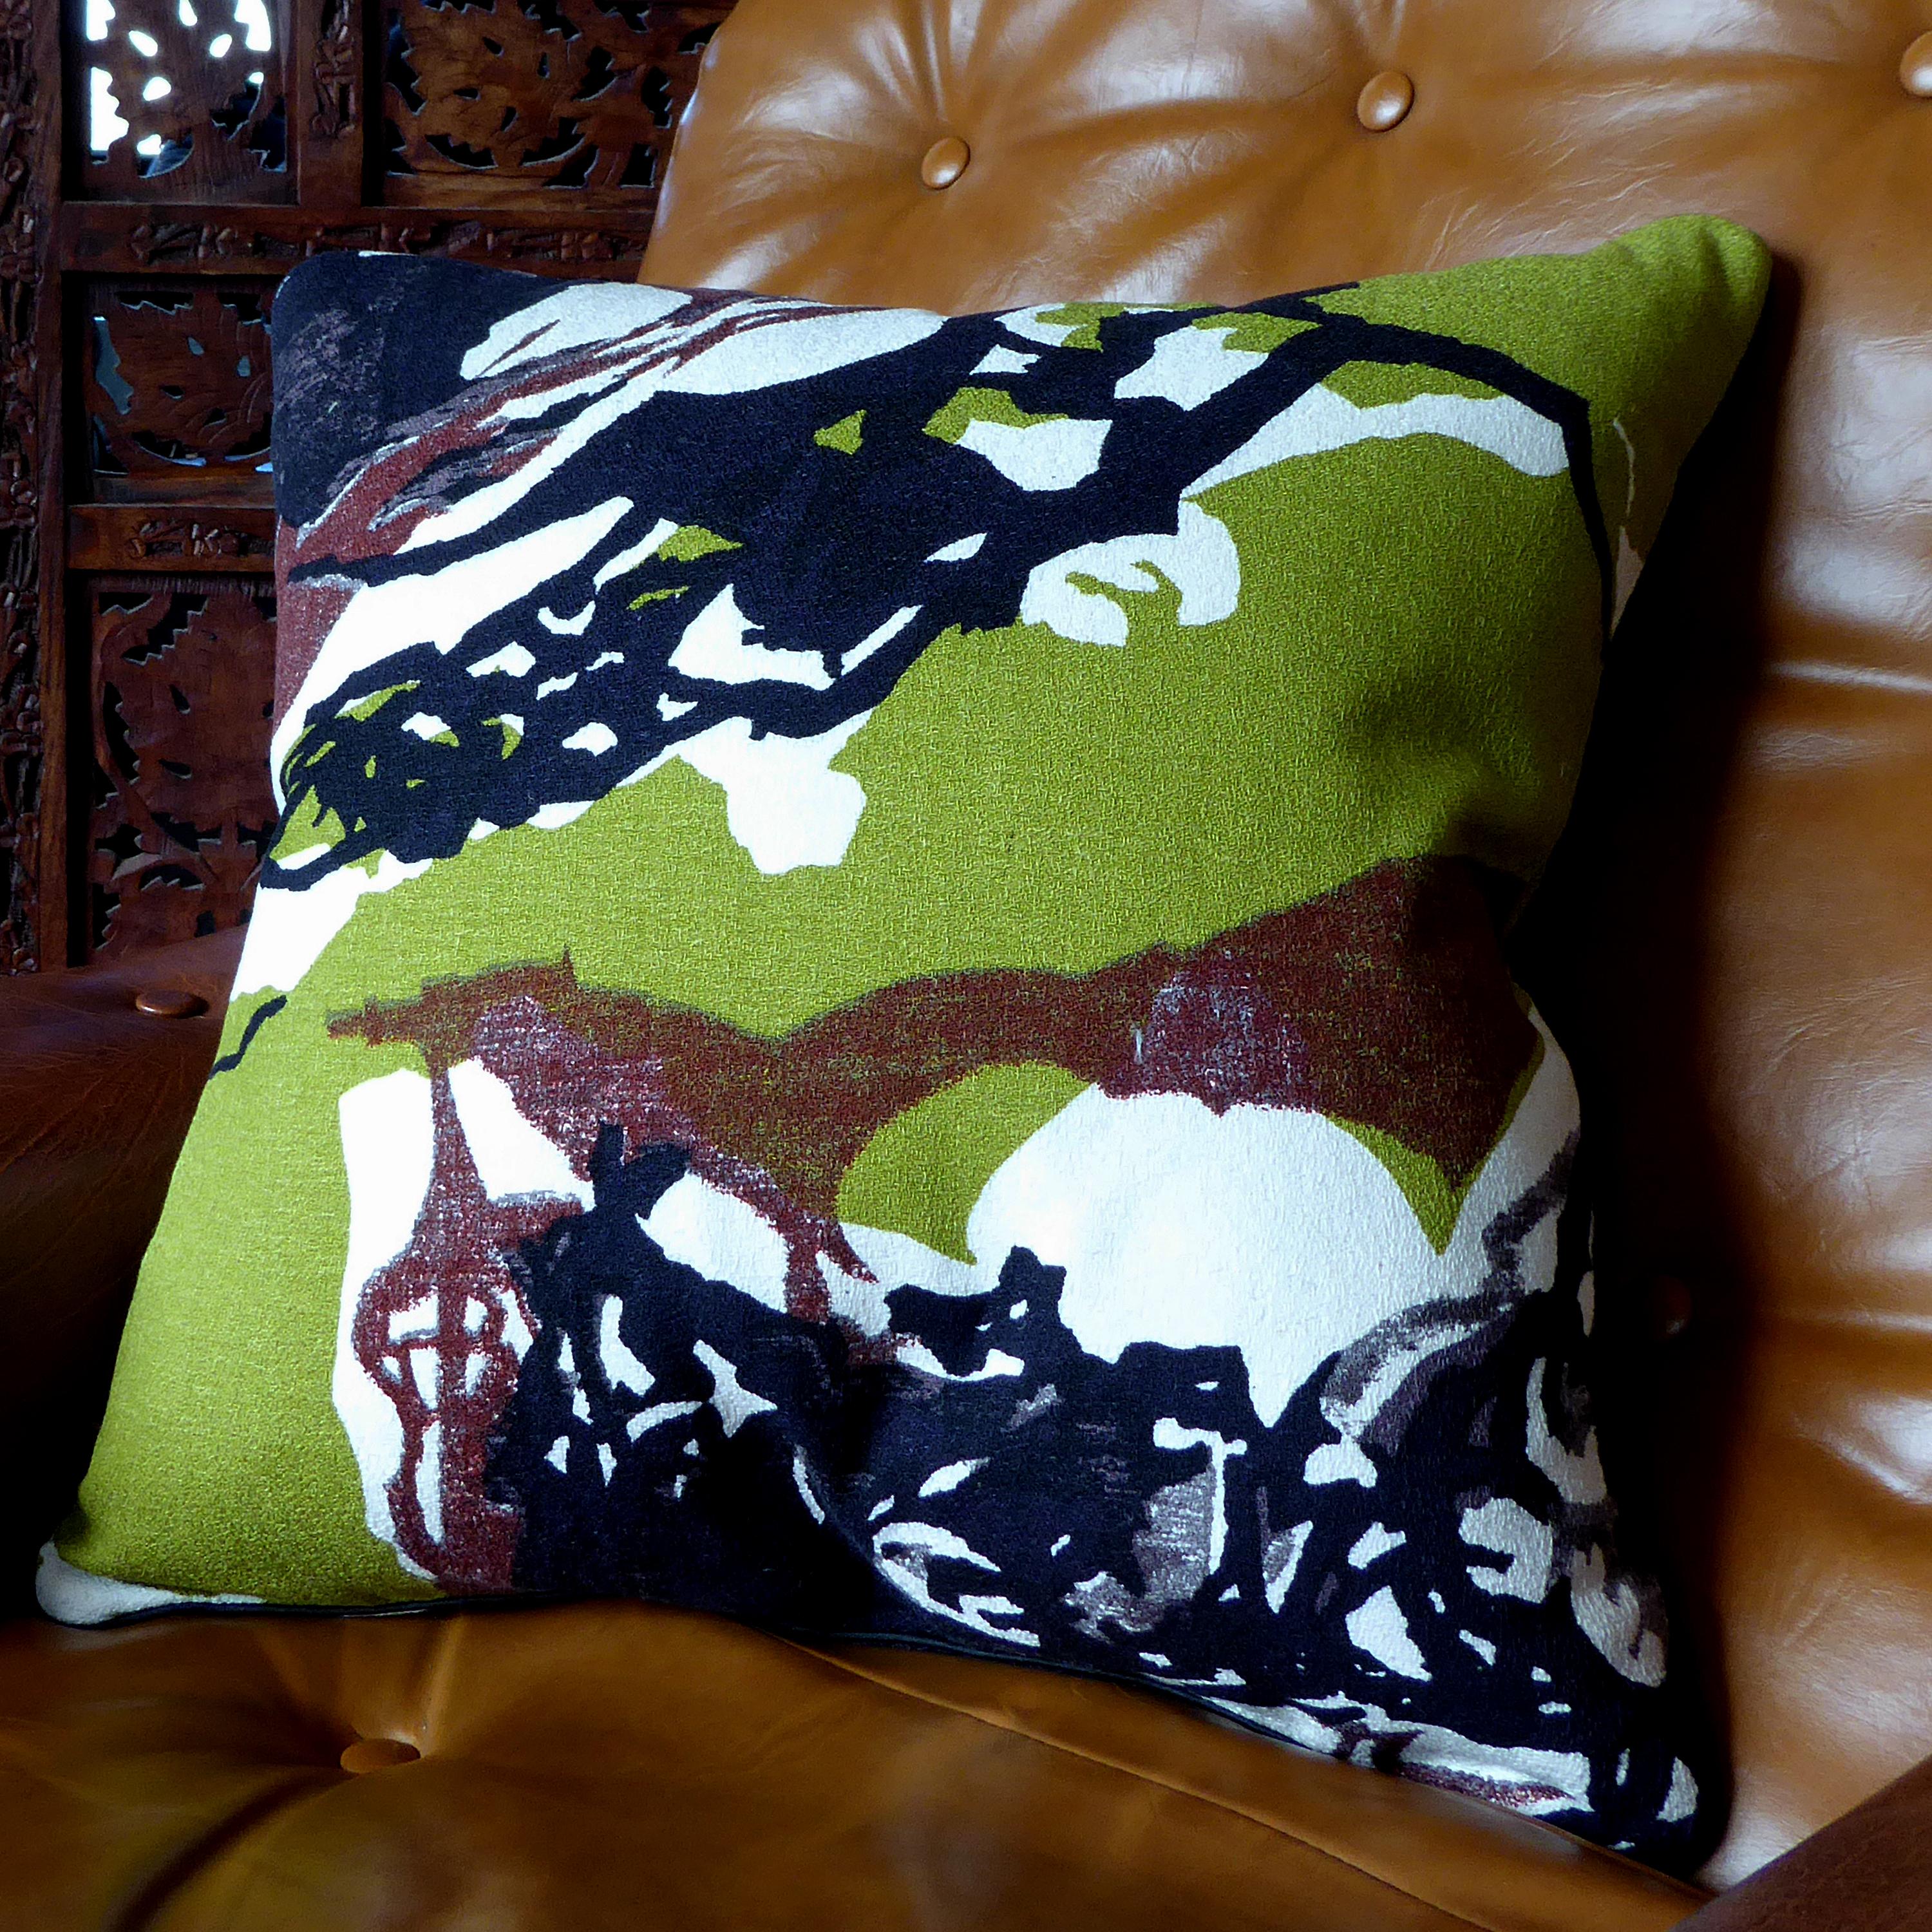 Vintage cushions, midcentury,
circa - 1950
British bespoke made luxury cushion created by using original vintage furnishing fabric in a typical 1950s abstract design
Provenance; Britain
Made by Nichollette Yardley-Moore
Cotton bark-cloth and full